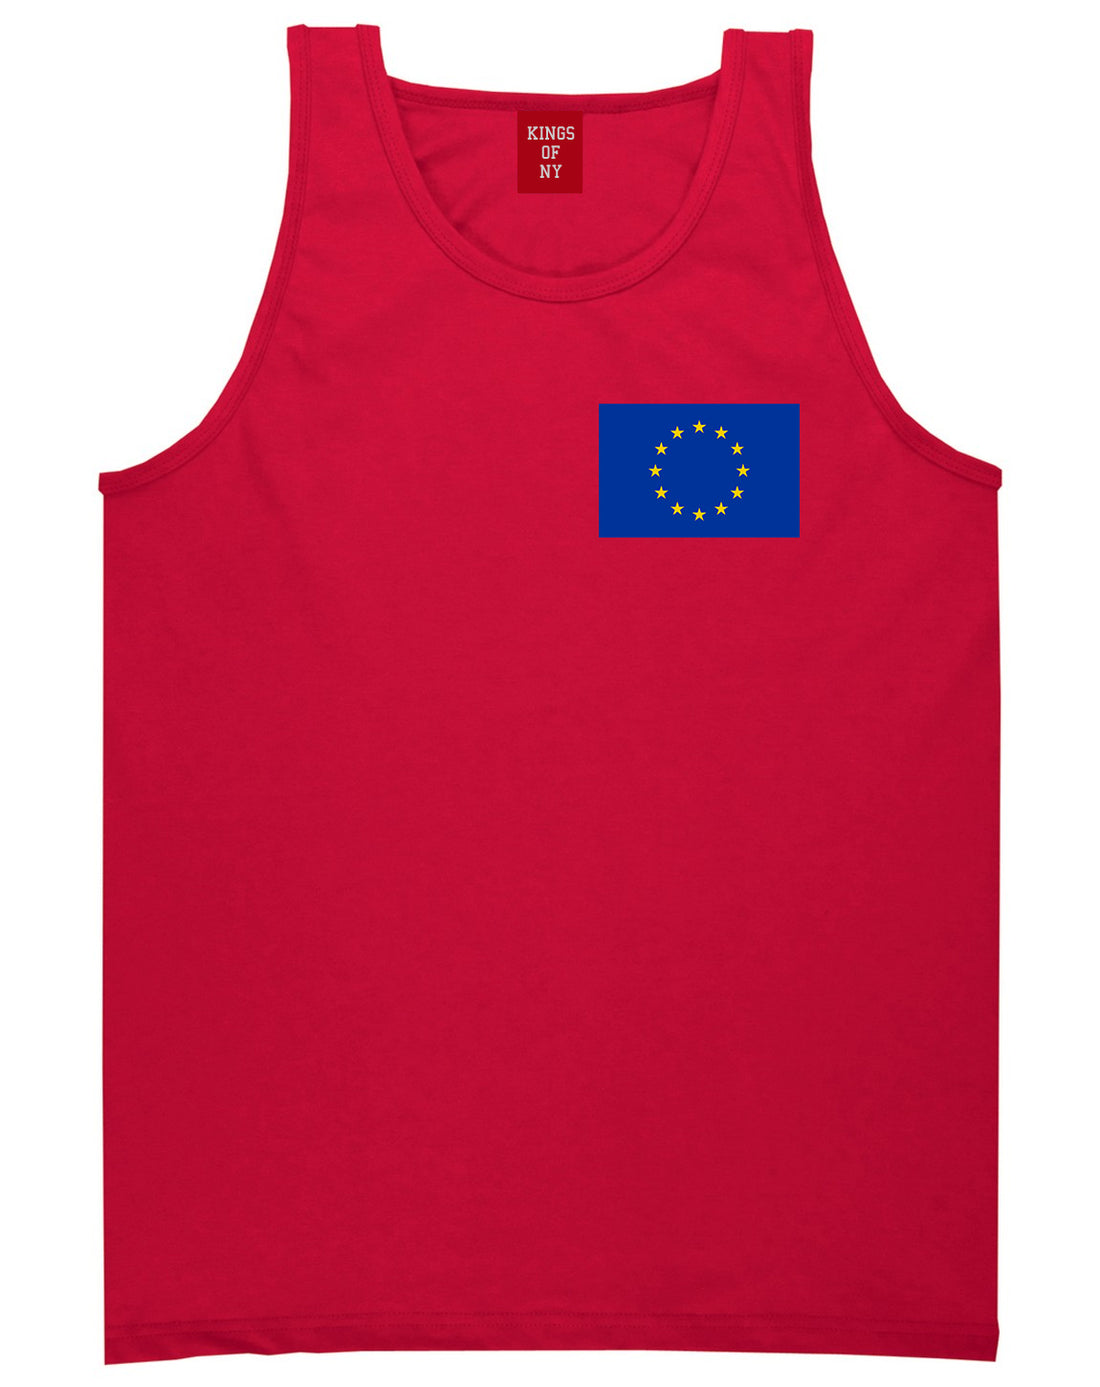 European Union Flag Chest Mens Red Tank Top Shirt by KINGS OF NY